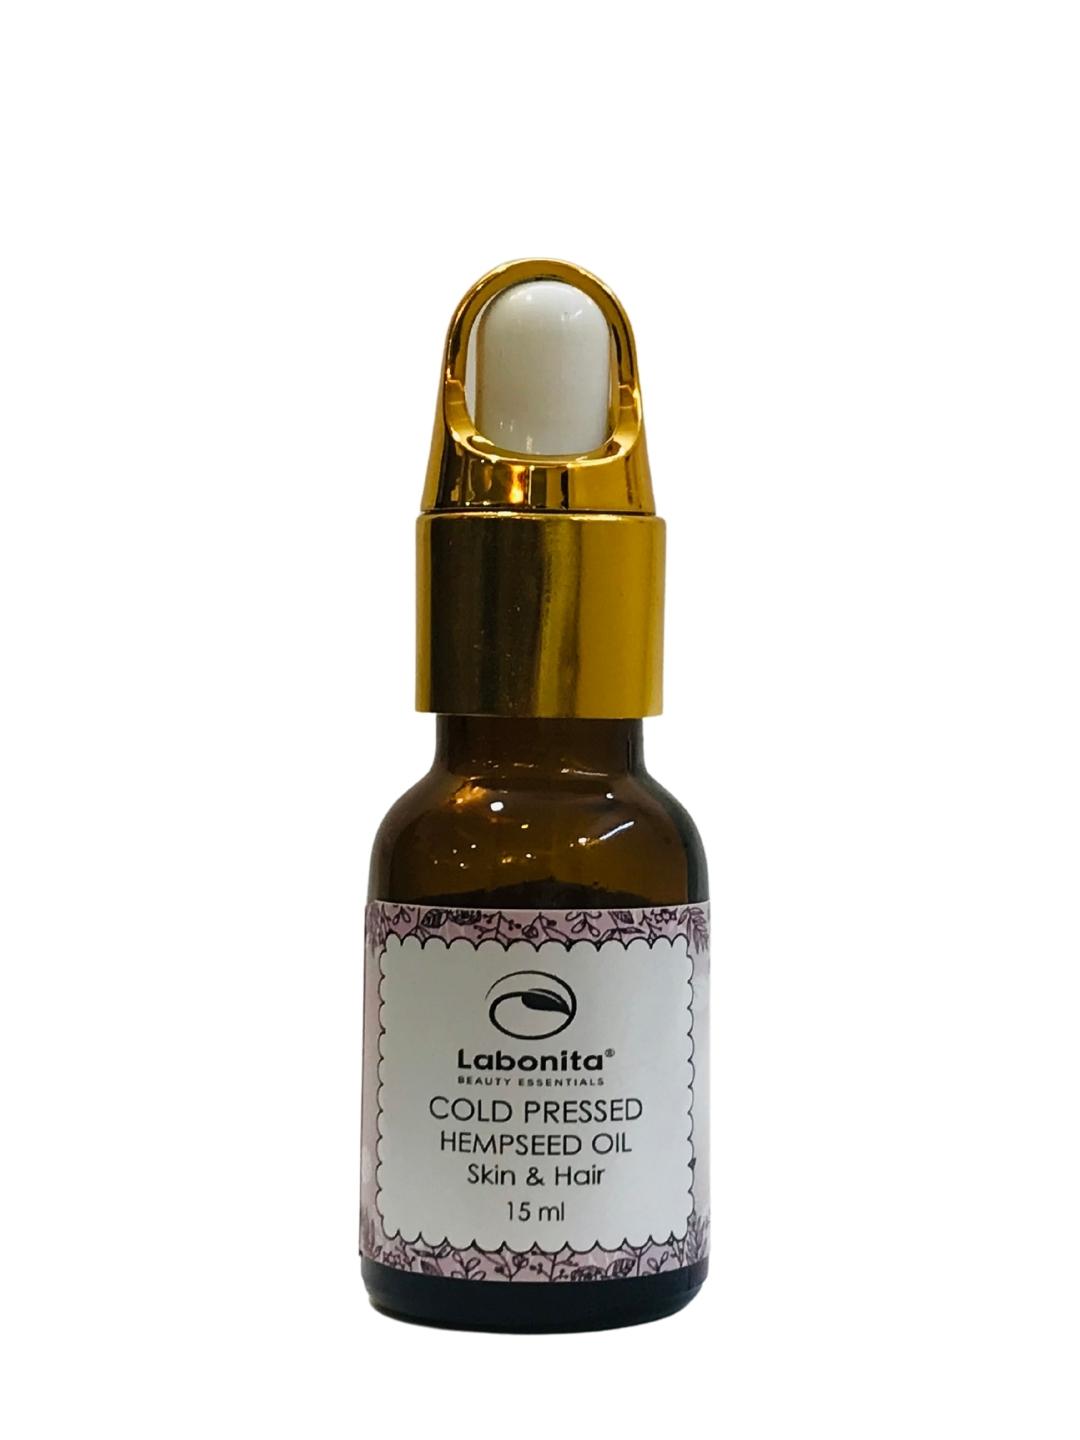 Cold Pressed Hempseed Oil With Omega-6 Fatty Acid For Acne-Prone Skin & All Hair Types